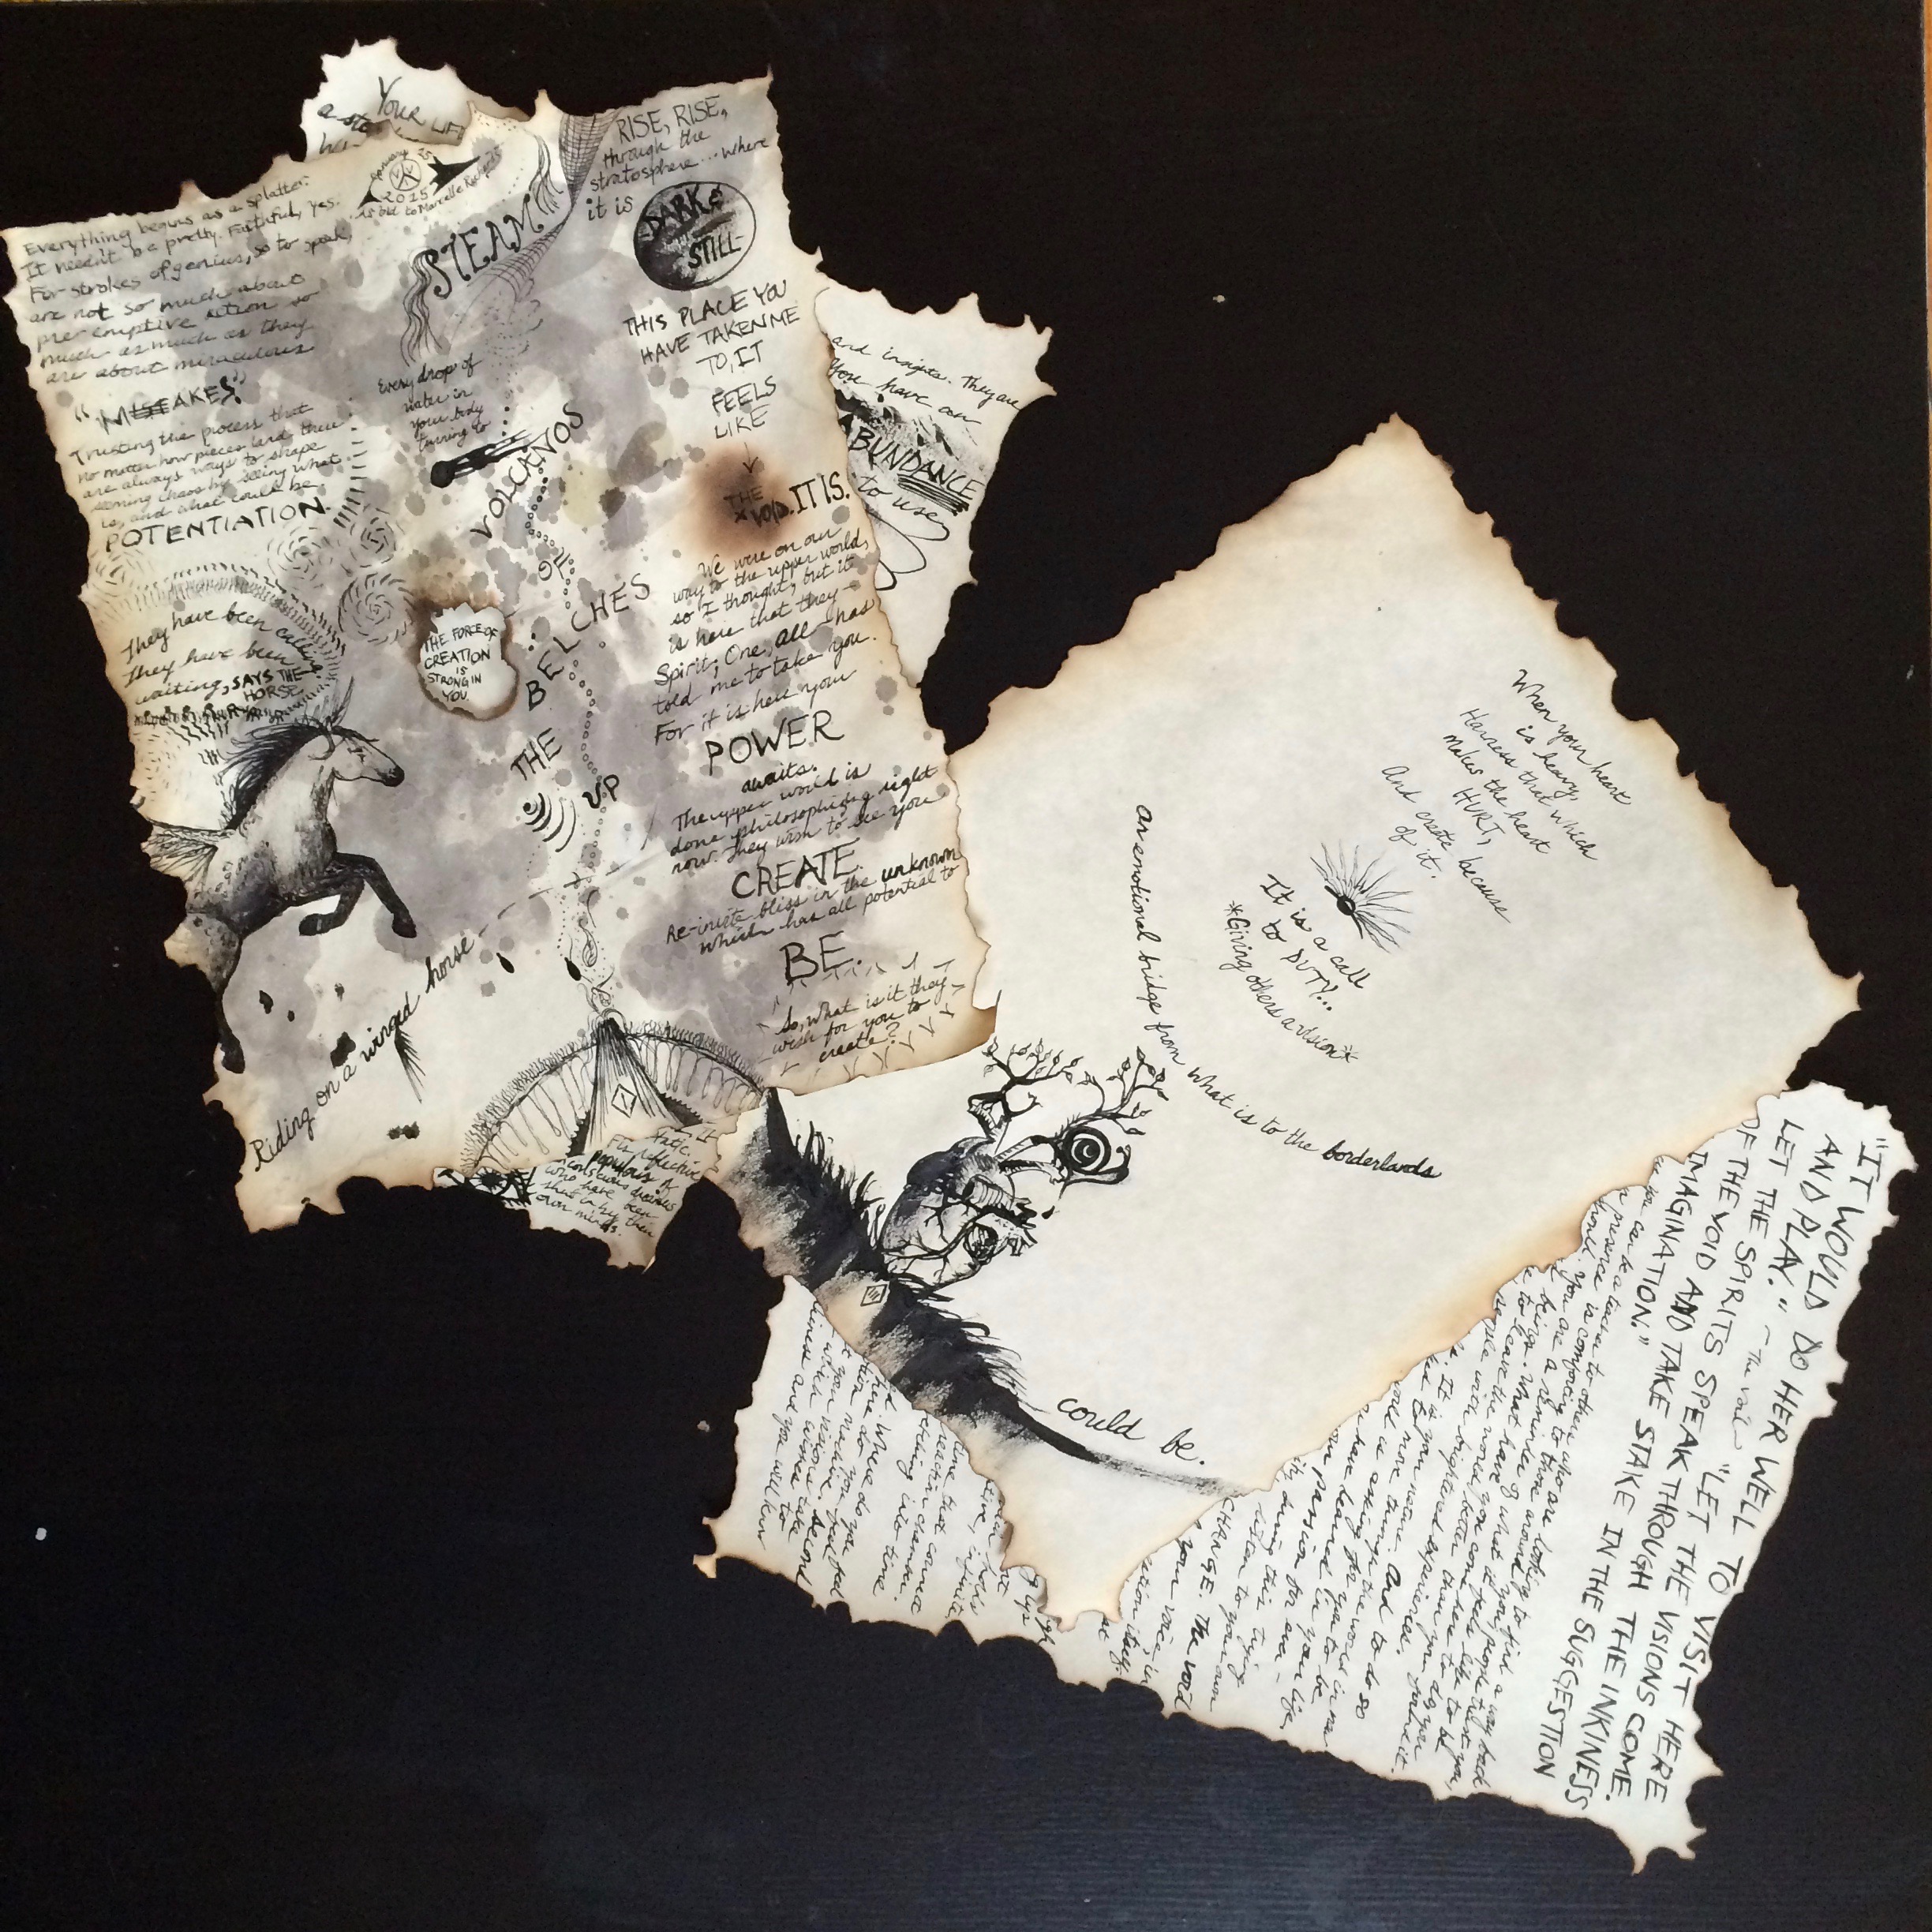 Image description: Four sheets of parchment paper with burned edges, cursive and block writing, including drawings of a horse and an anatomical heart.